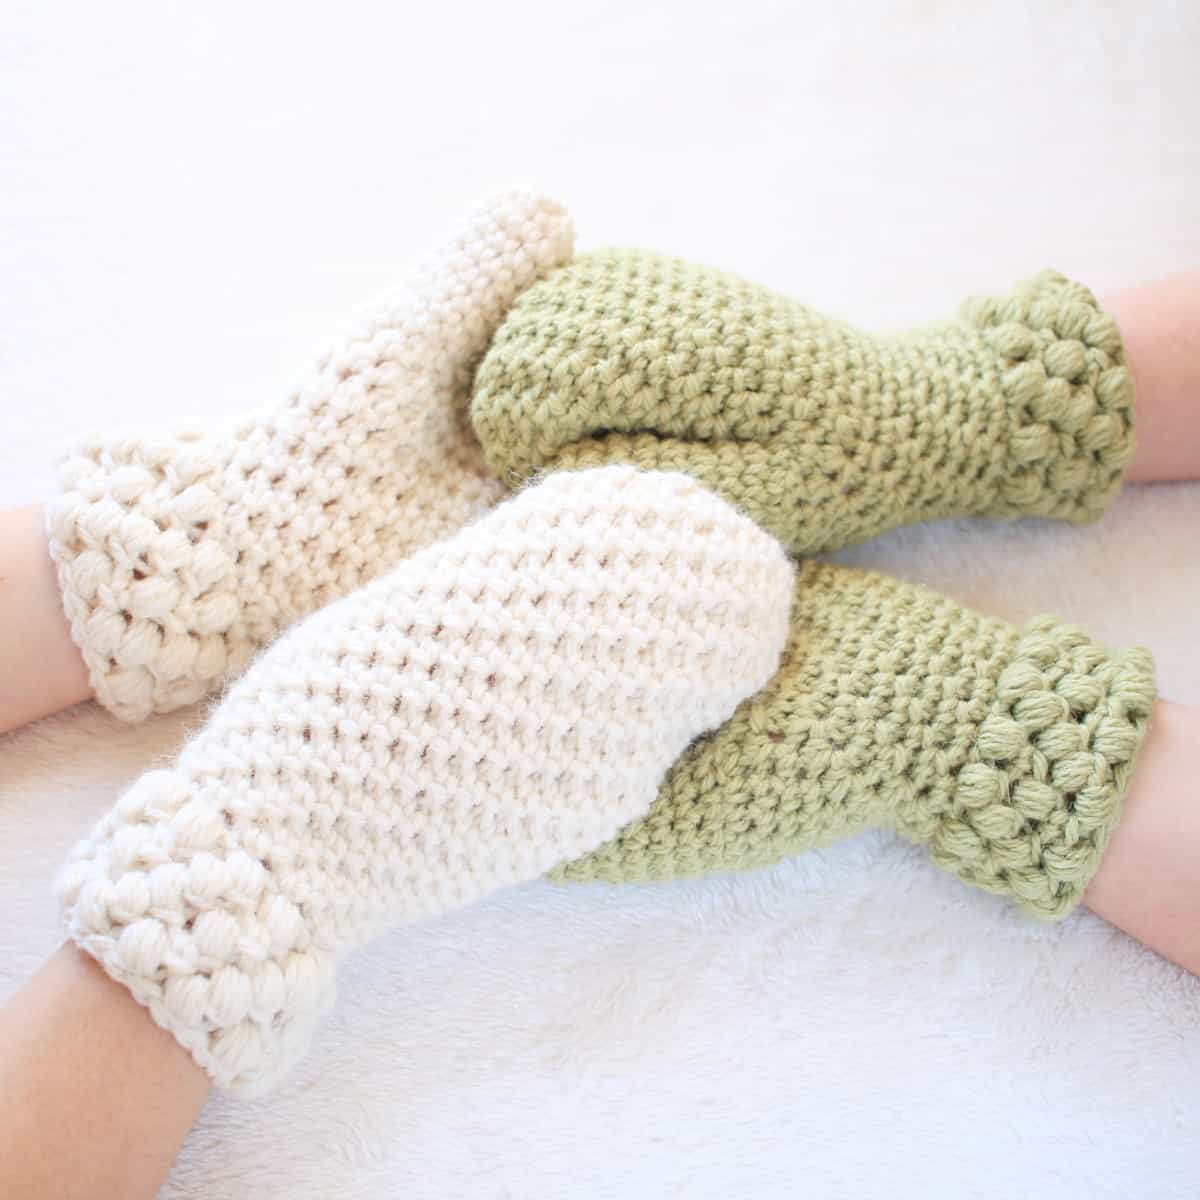 Adorable Gathered Buds Crochet Mittens Pattern is Free.